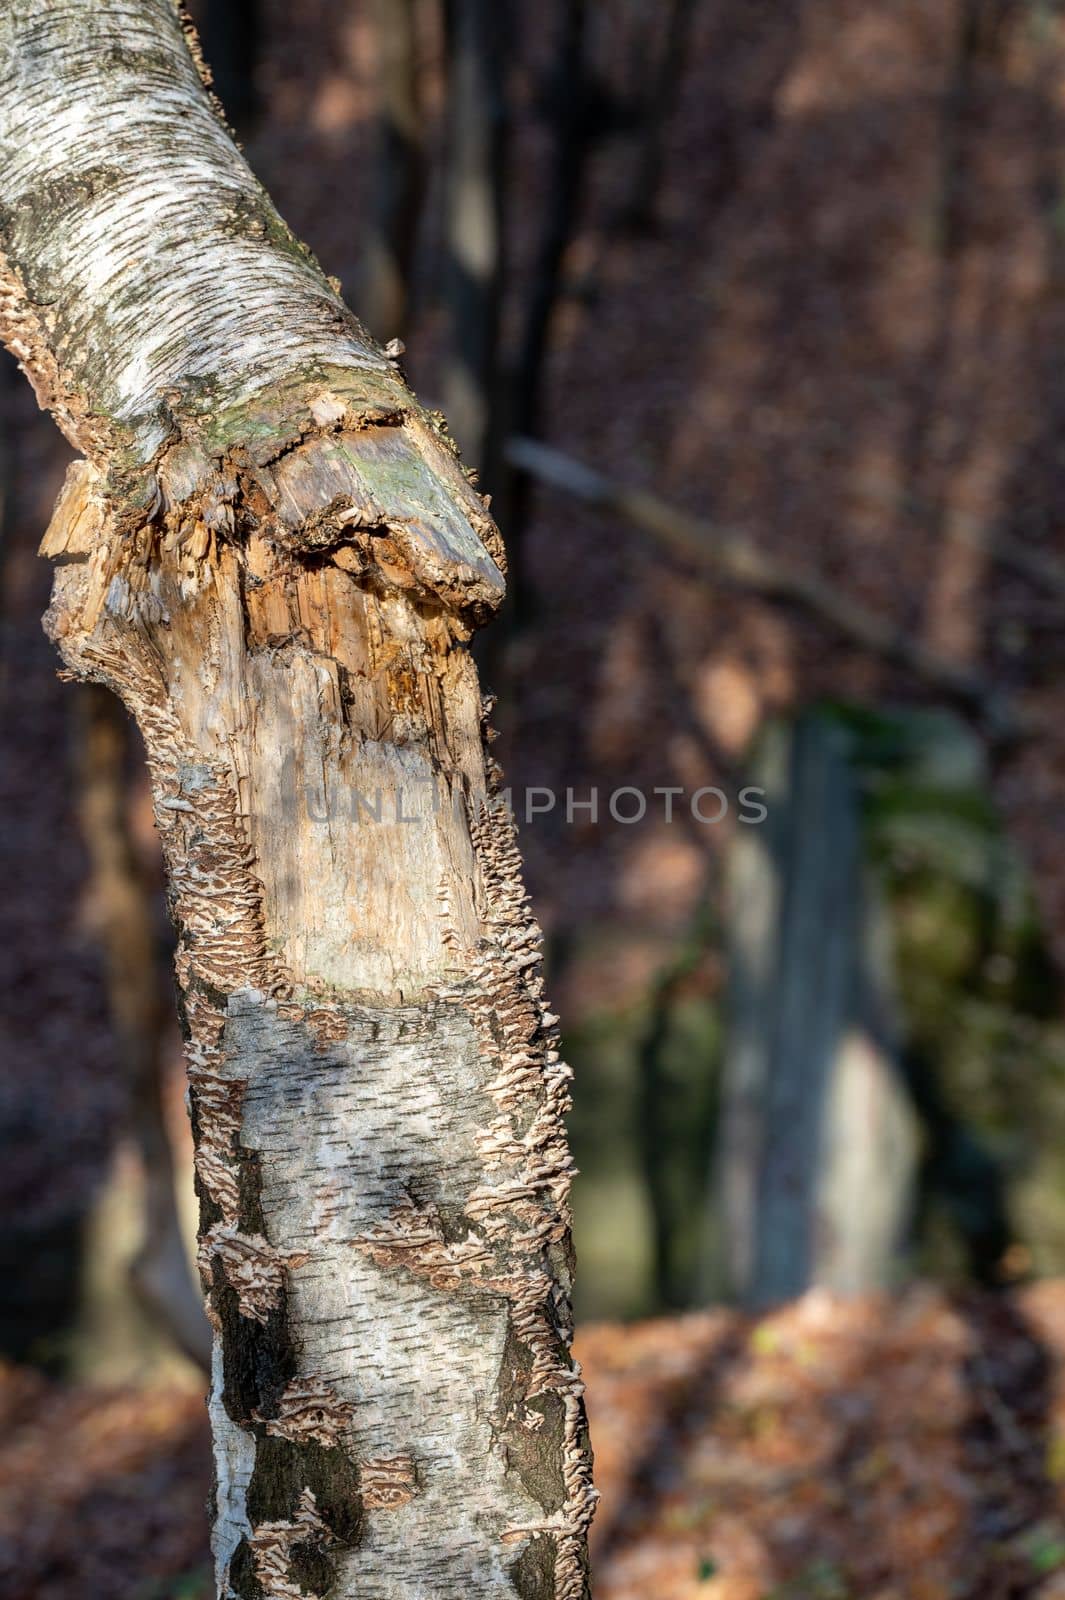 A fracture of a birch trunk caused by a strong wind.